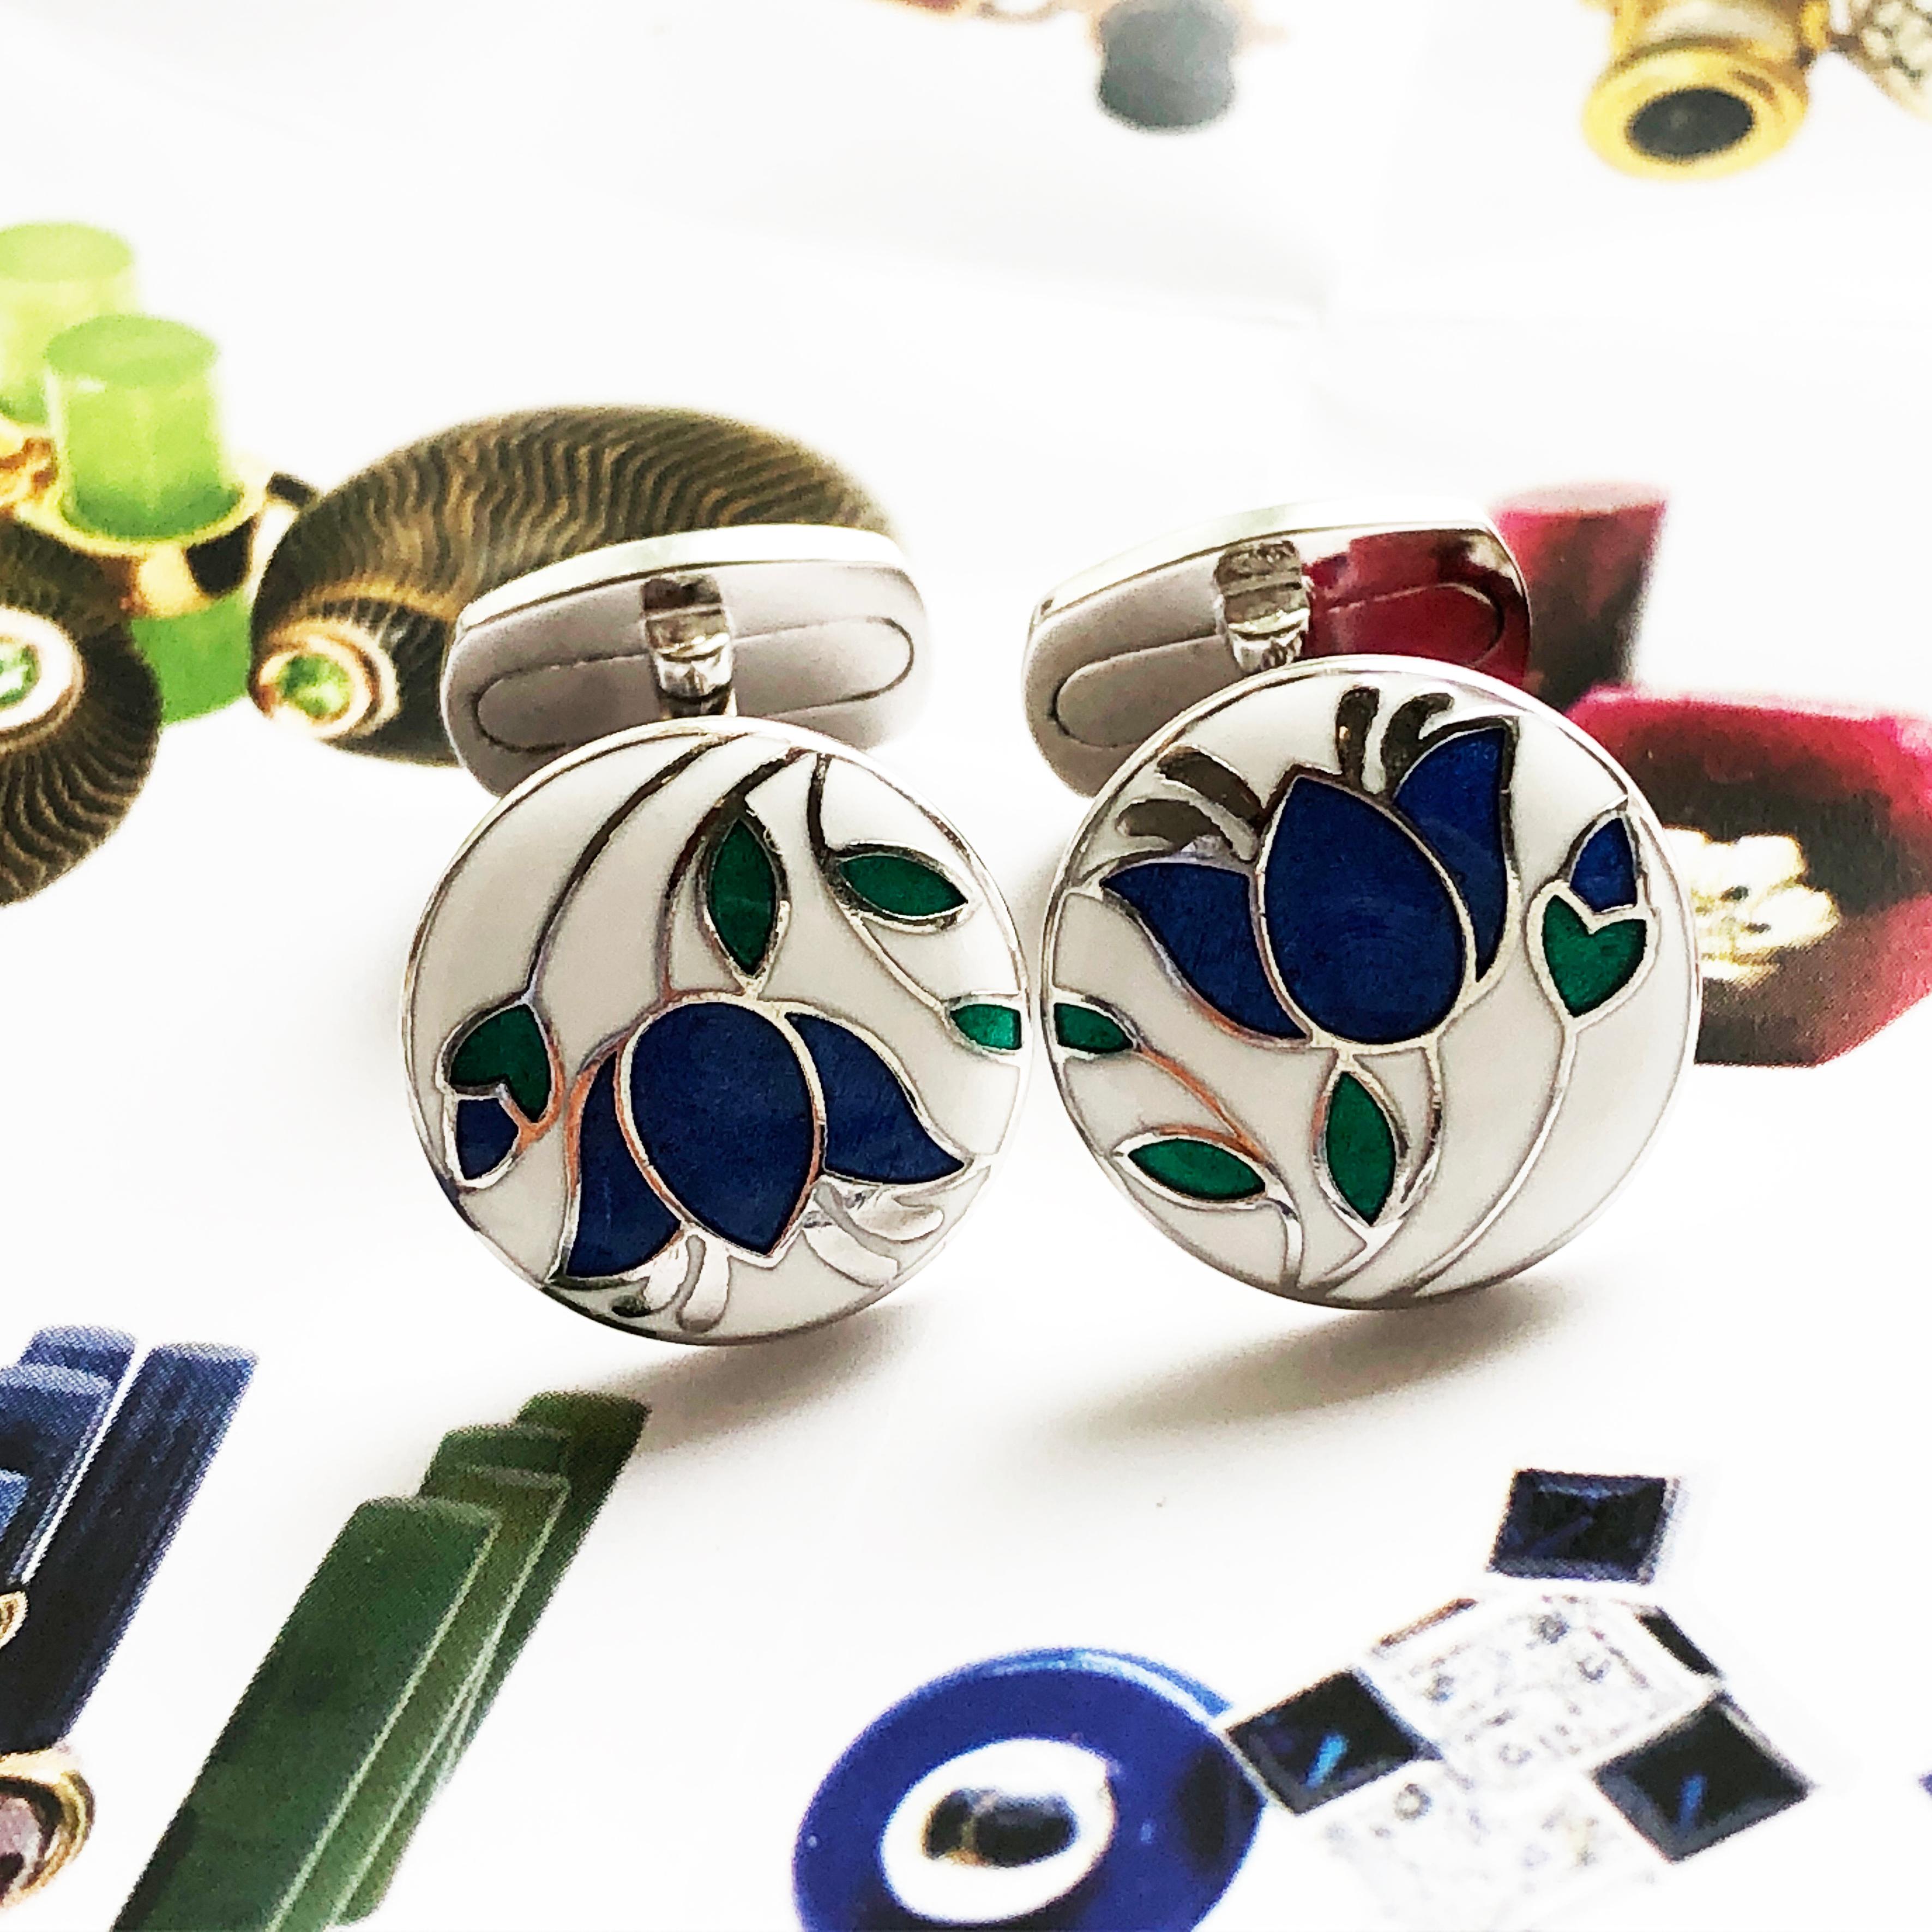 Chic, Unique yet Timeless Hand Enameled Blue Flower, Green Leaves, in a Round White Setting Cabochon Sterling Silver Cufflinks, T-bar back.
In our Smart Tobacco Suede Leather Case and Pouch.
Front Diameter about 0.596 inches.